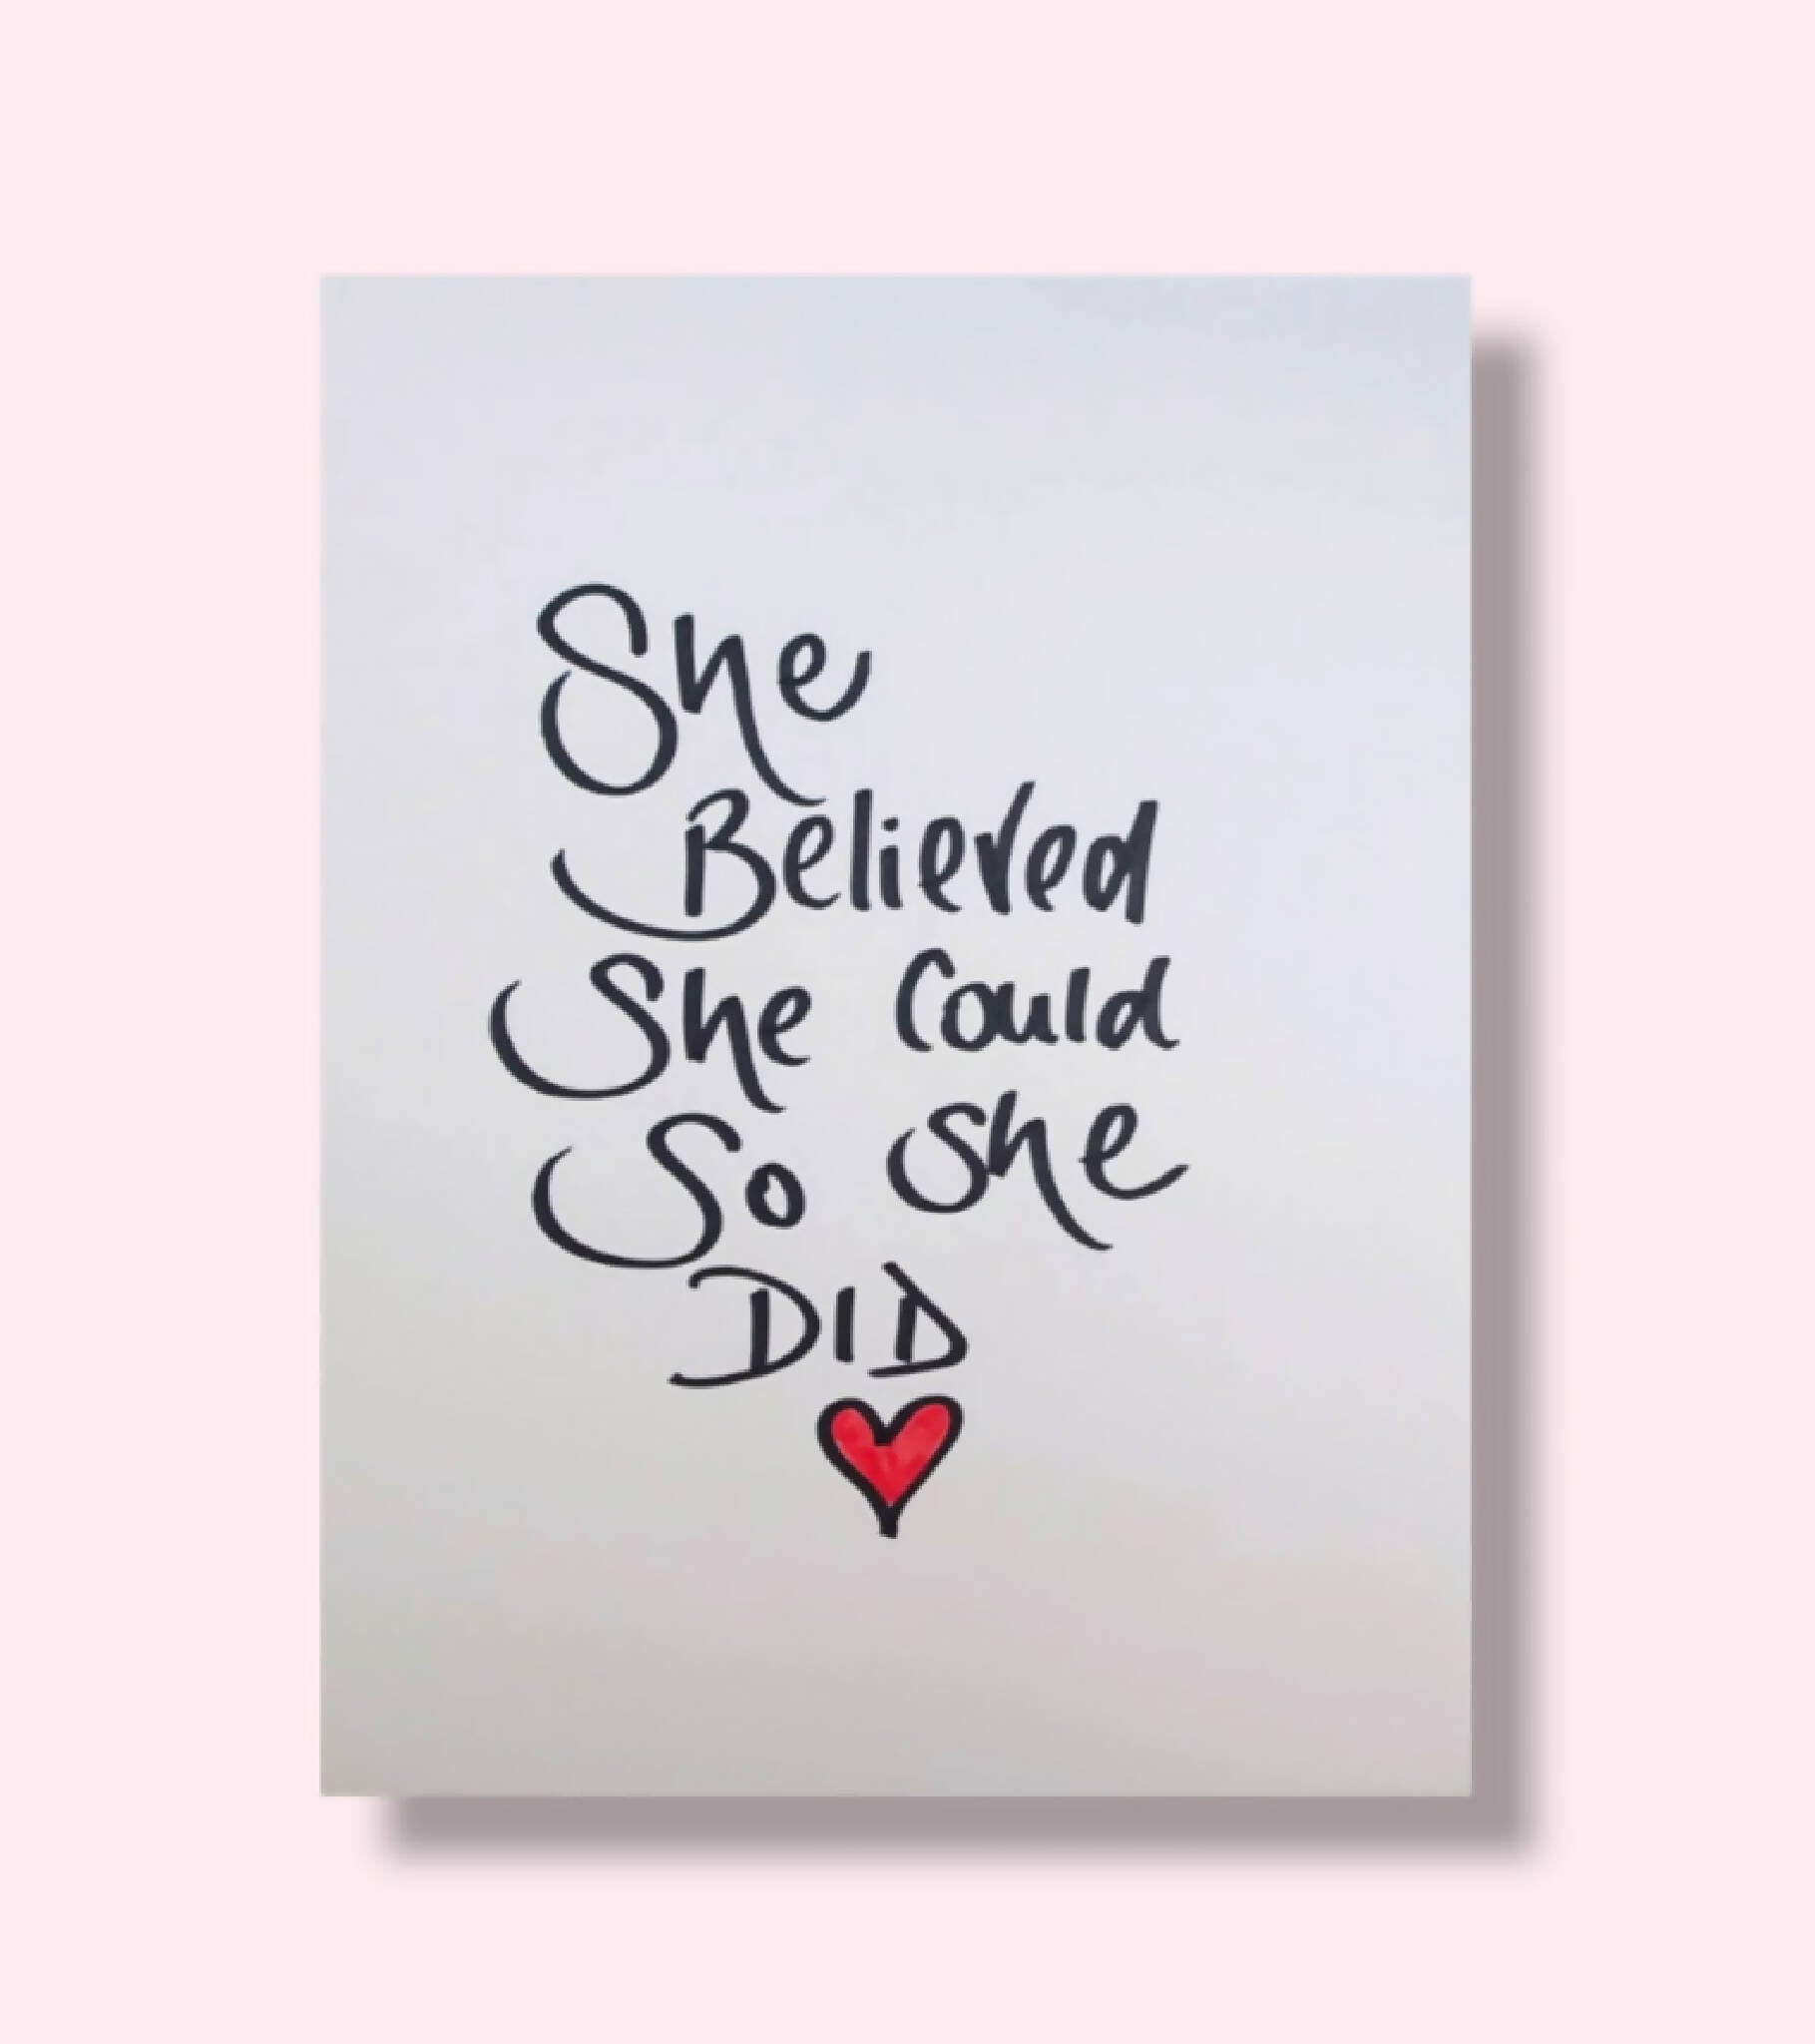 'She believed she could do she did' handwritten A4 print, PRINT ONLY no frame or mount.